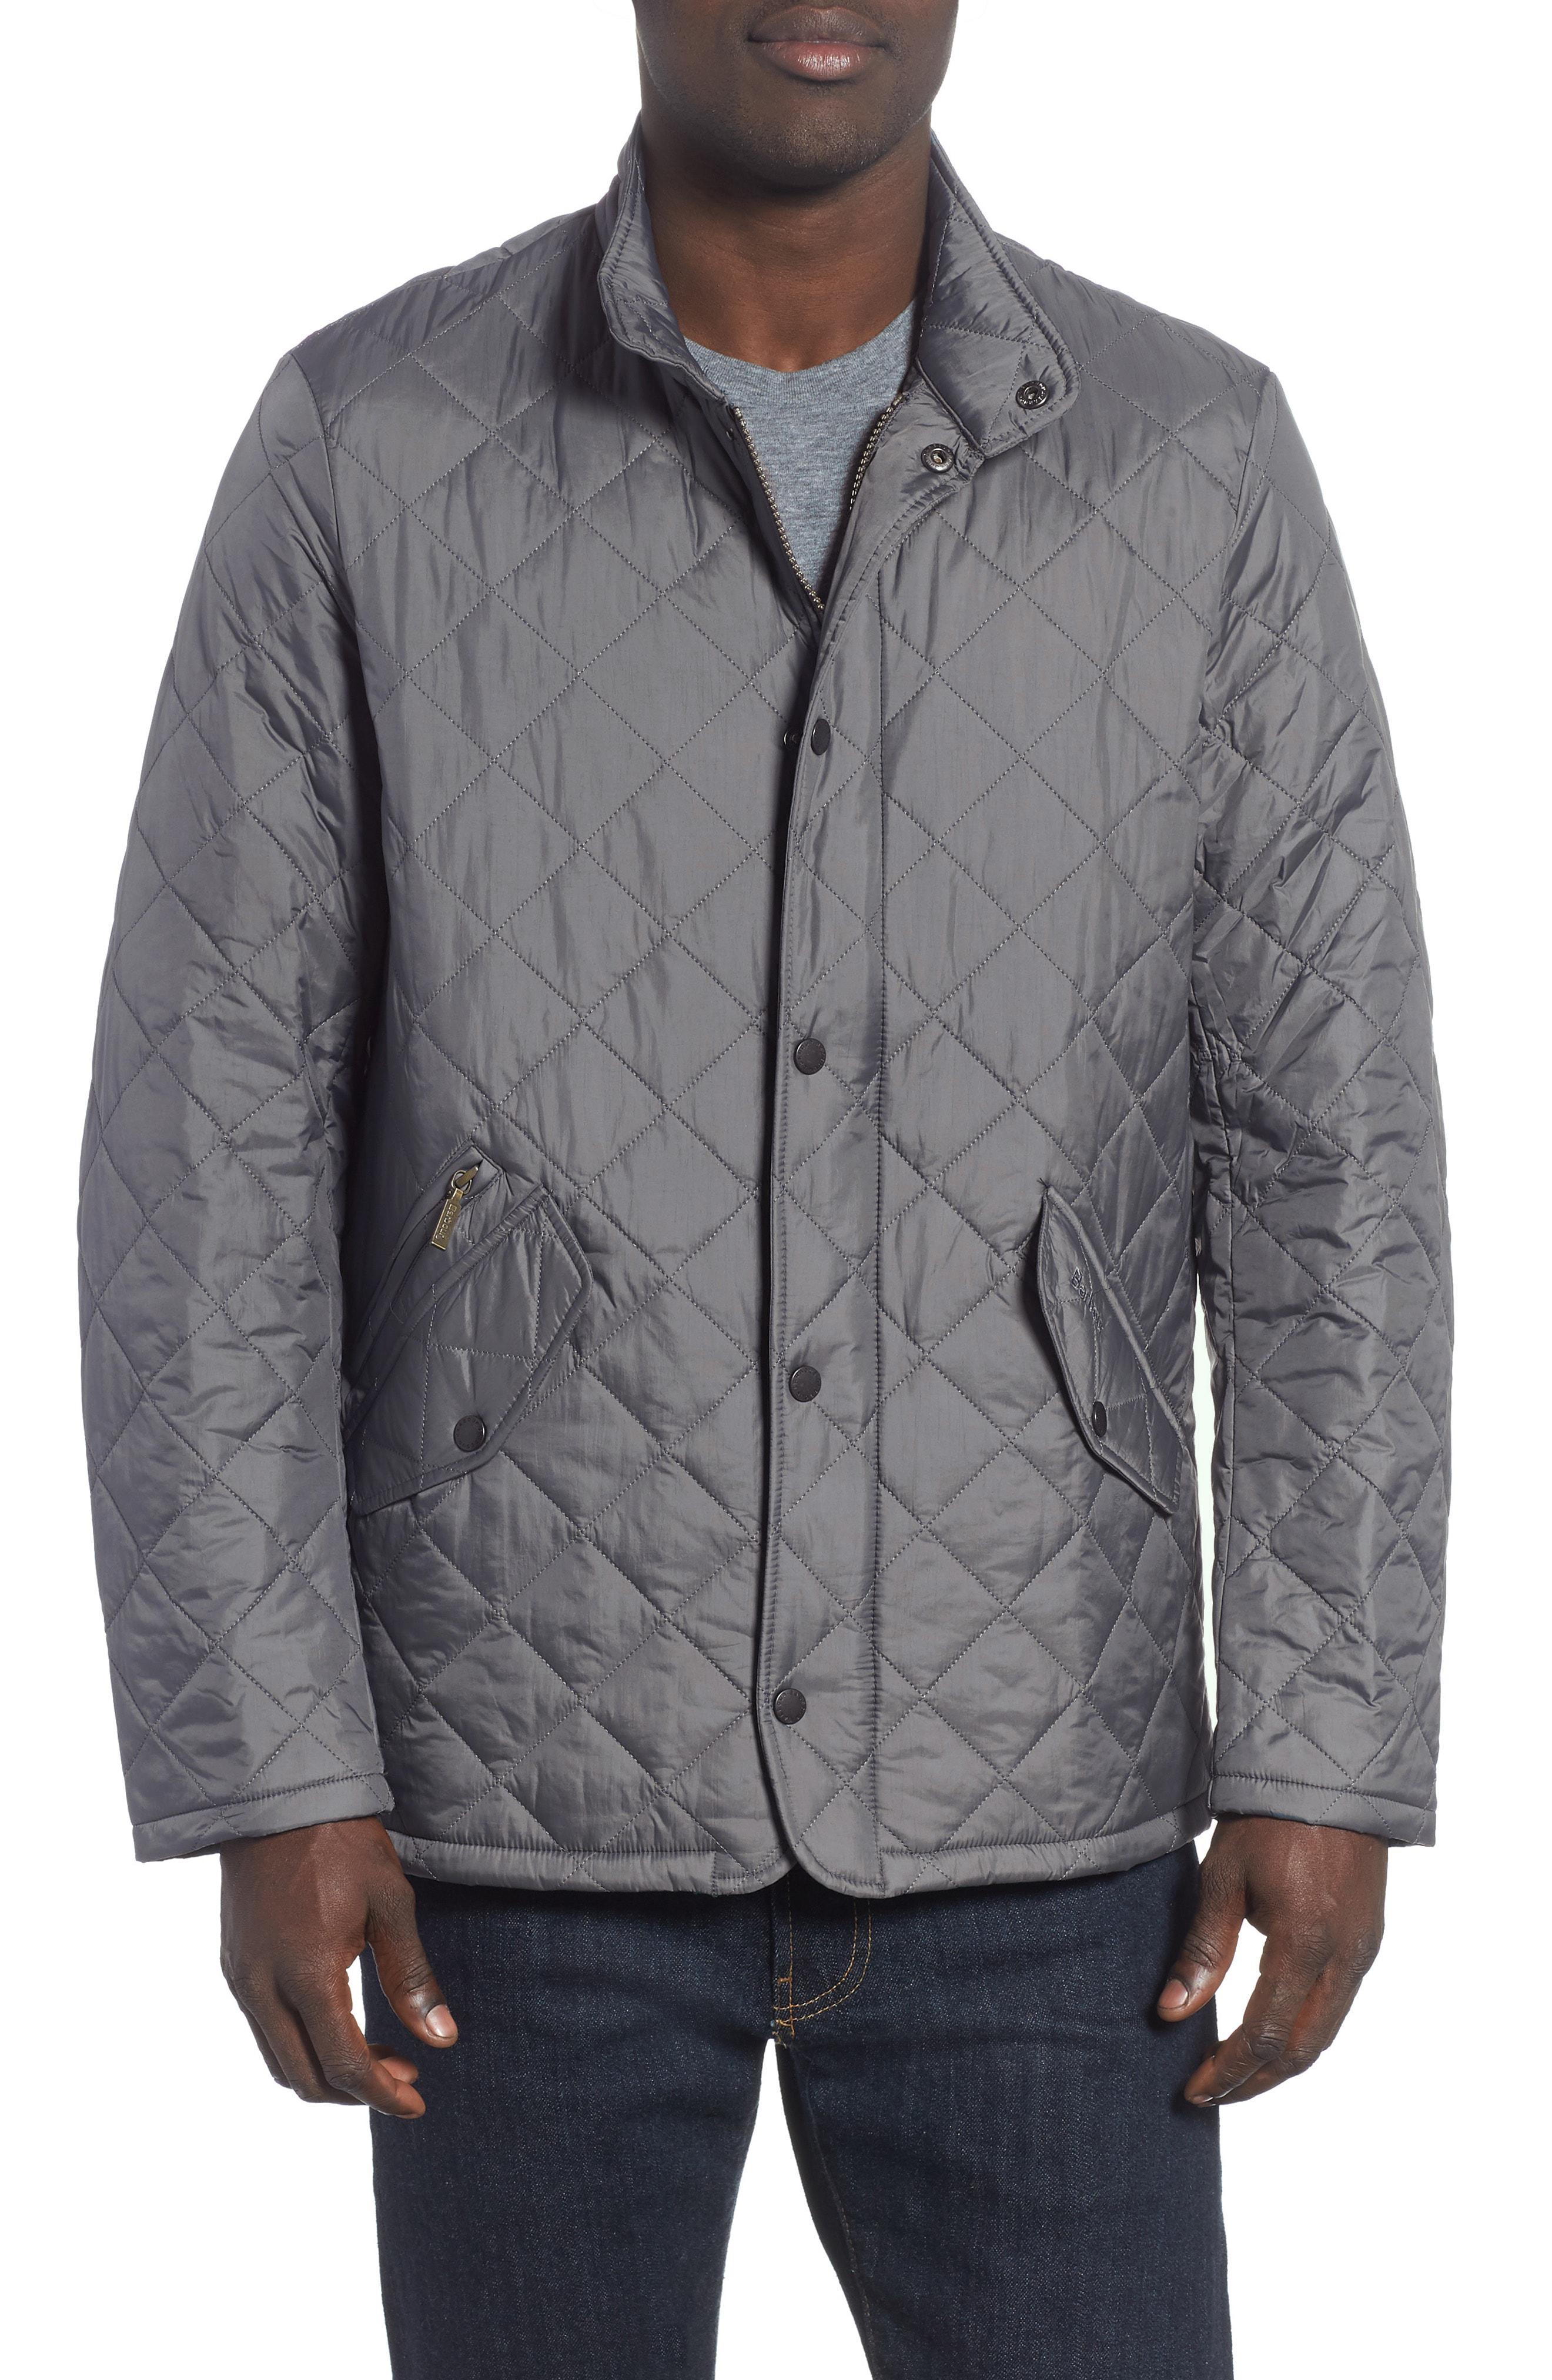 Lyst - Barbour Flyweight Chelsea Quilted Jacket in Gray for Men